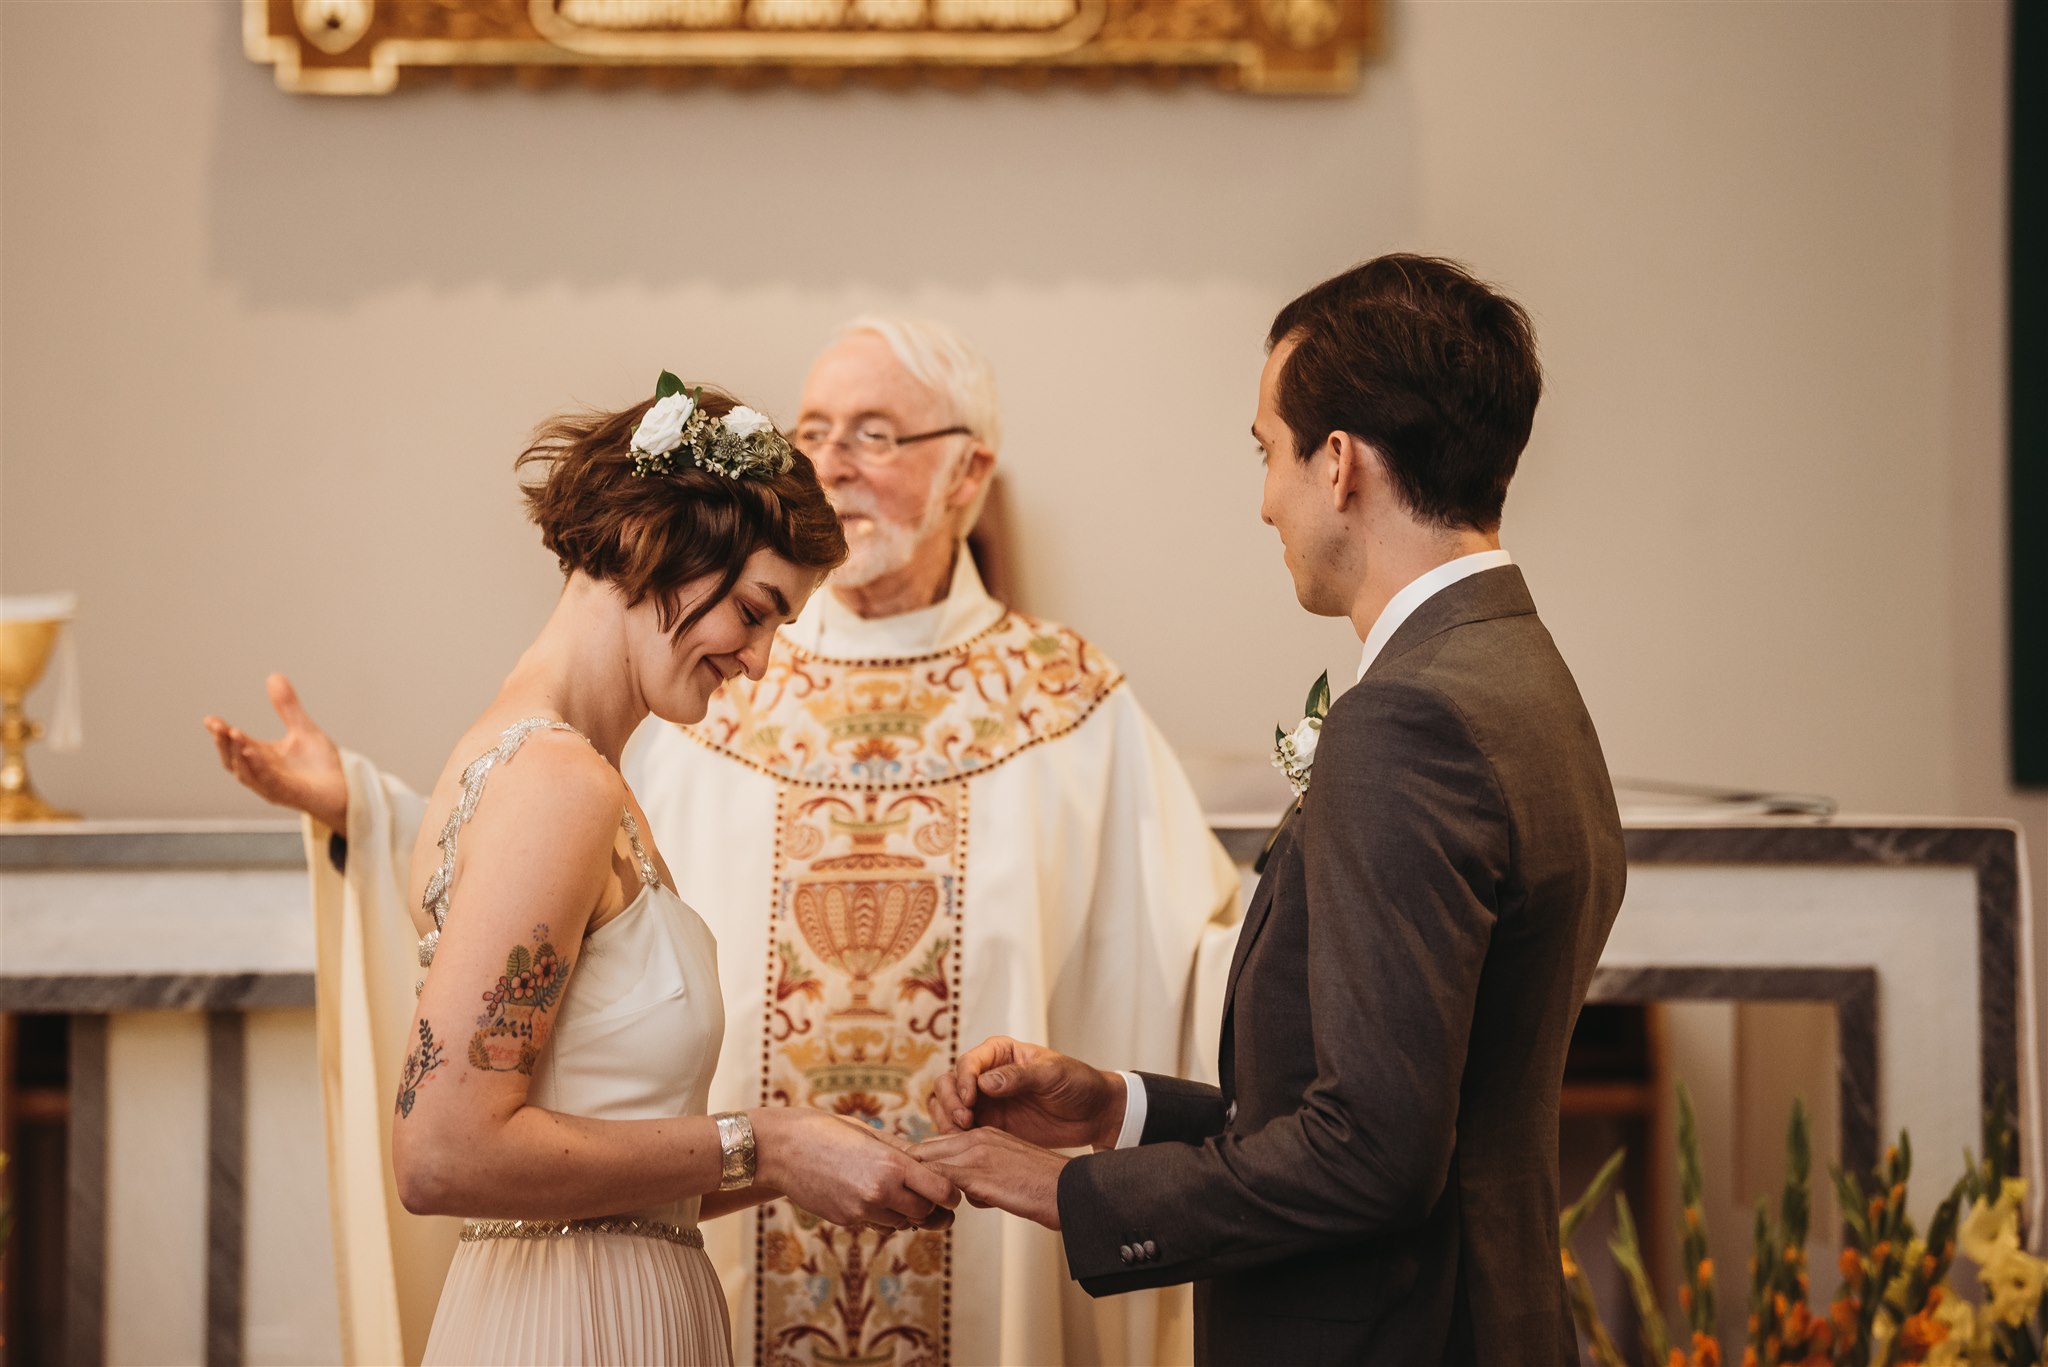 wedding ceremony at our lady of czestochowa polish catholic church in london ontario, captured by london wedding photographer Chelsey of Ten2Ten Photography